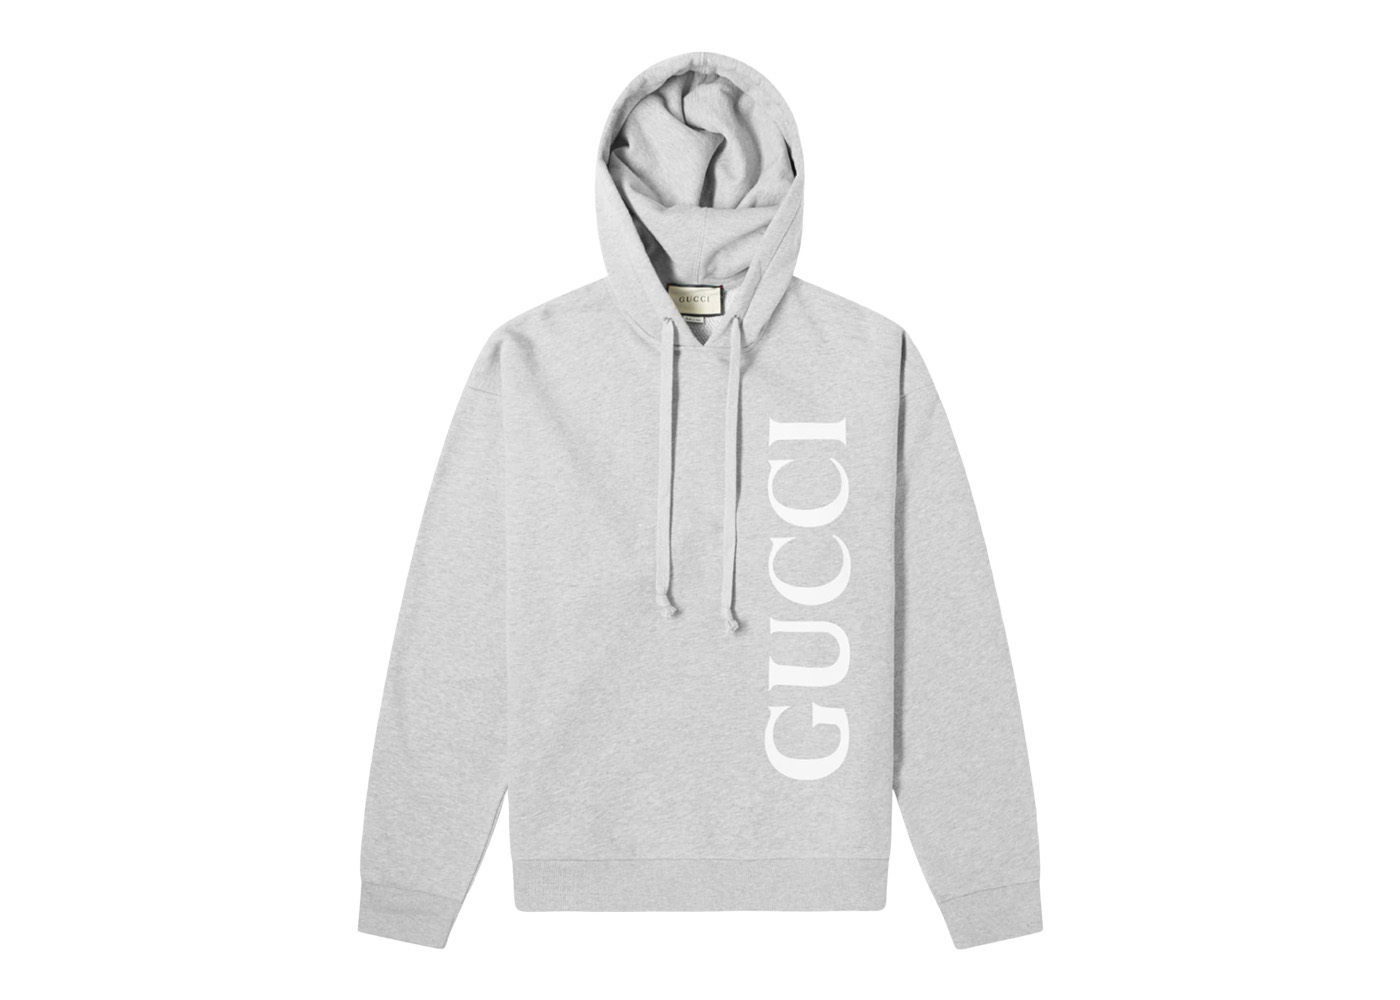 Gucci Large Gucci Logo Popover Hoodie Grey Marl Men's - US